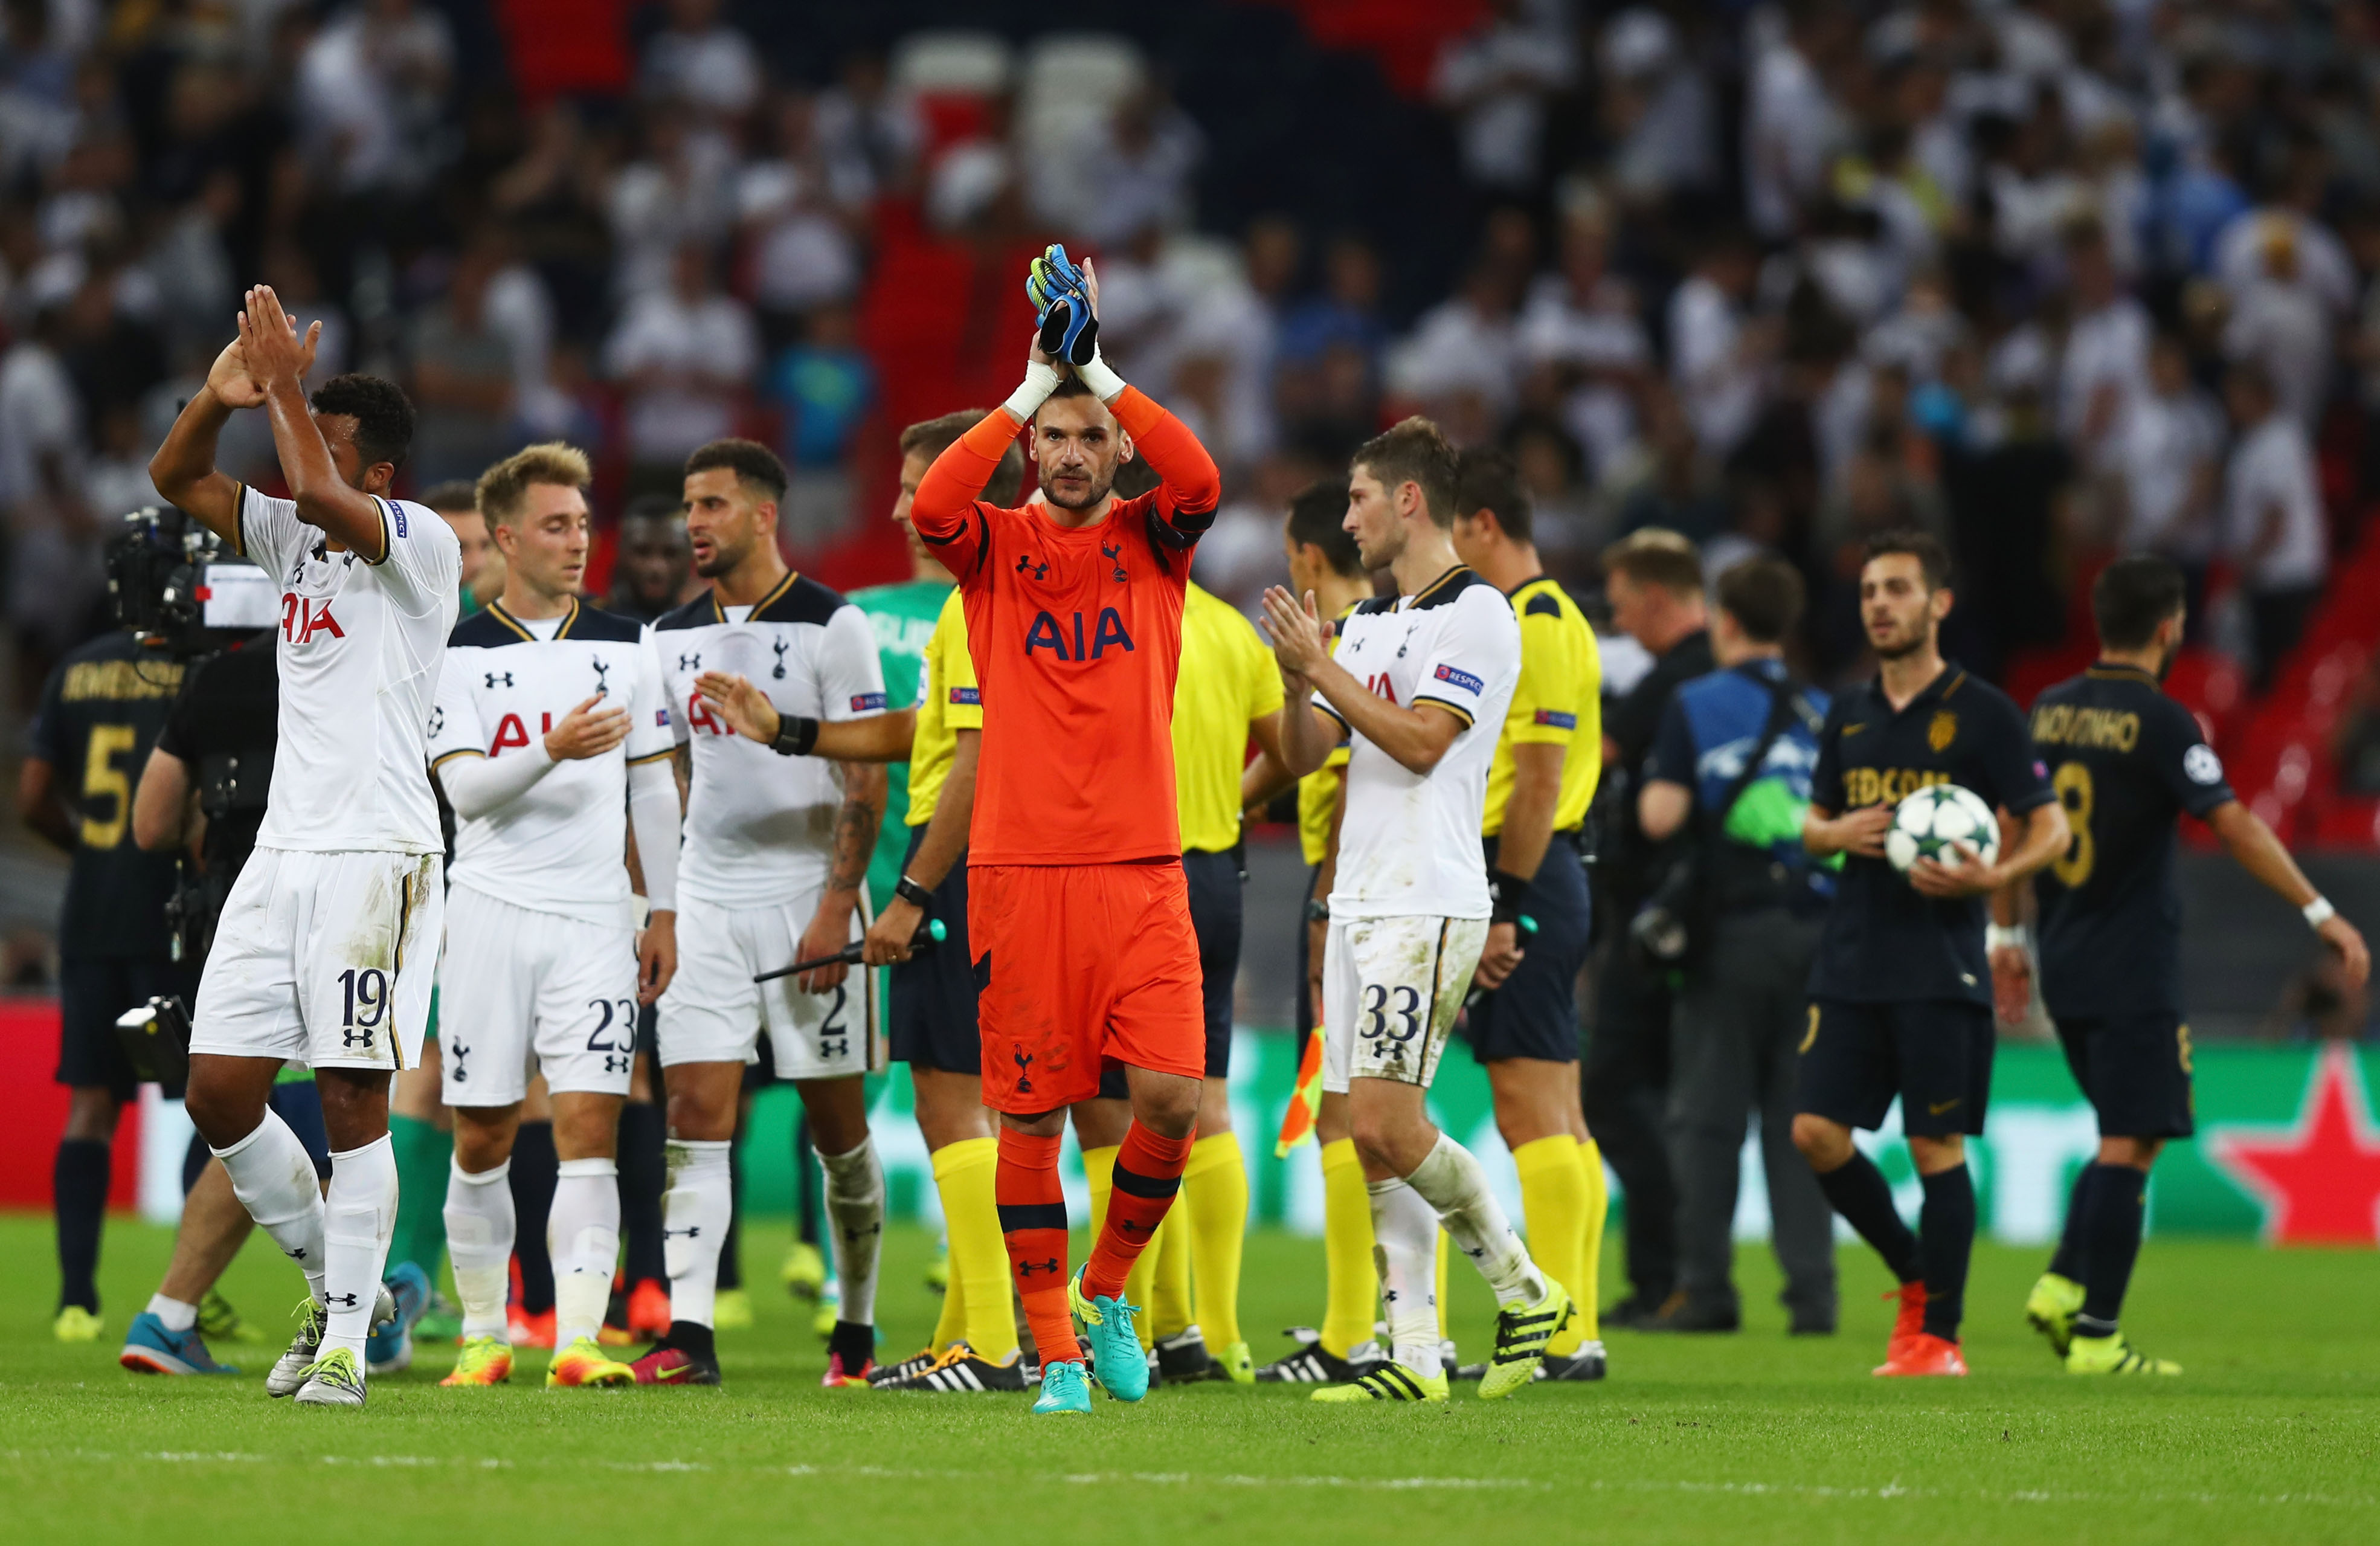 LONDON, ENGLAND - SEPTEMBER 14: Hugo Lloris of Tottenham Hotspur and his team-mates applaud fans during the UEFA Champions League match between Tottenham Hotspur FC and AS Monaco FC at Wembley Stadium on September 14, 2016 in London, England.  (Photo by Clive Rose/Getty Images)